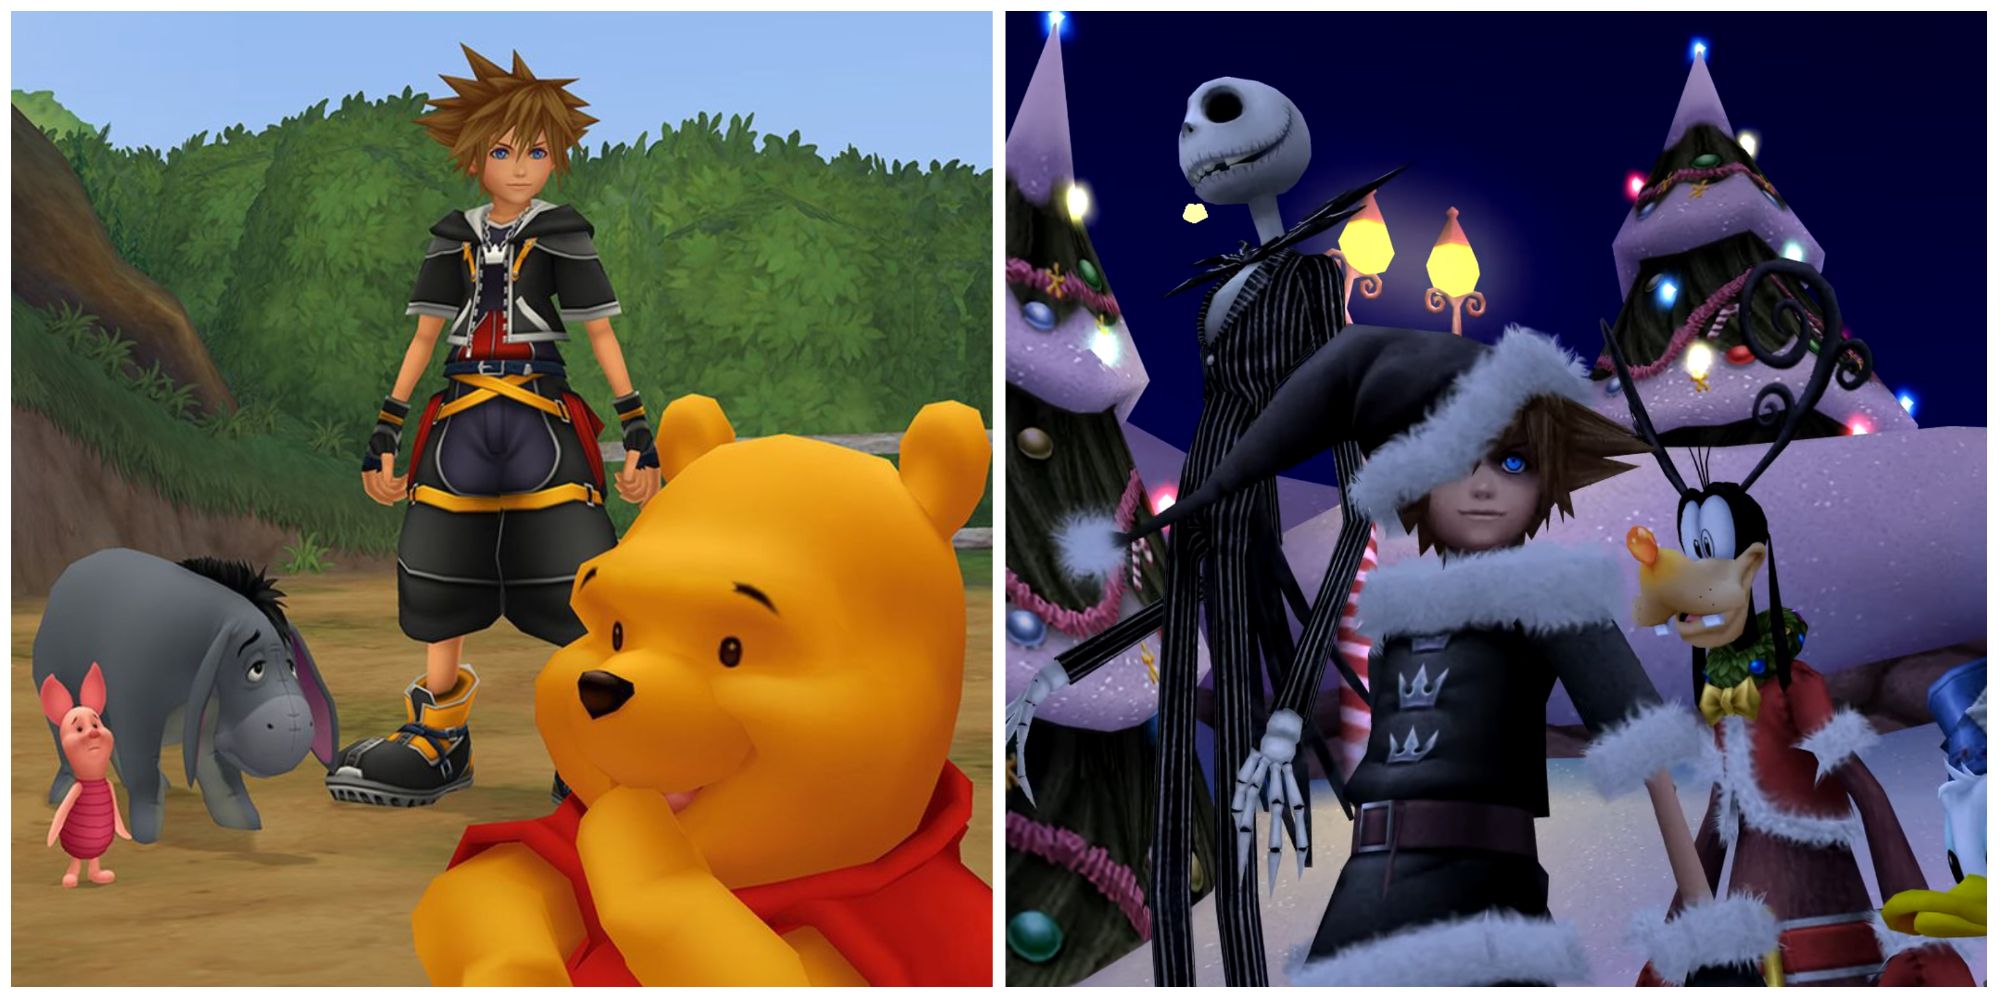 Sora in the 100 Acre Wood and Halloween Town in Kingdom Hearts 2